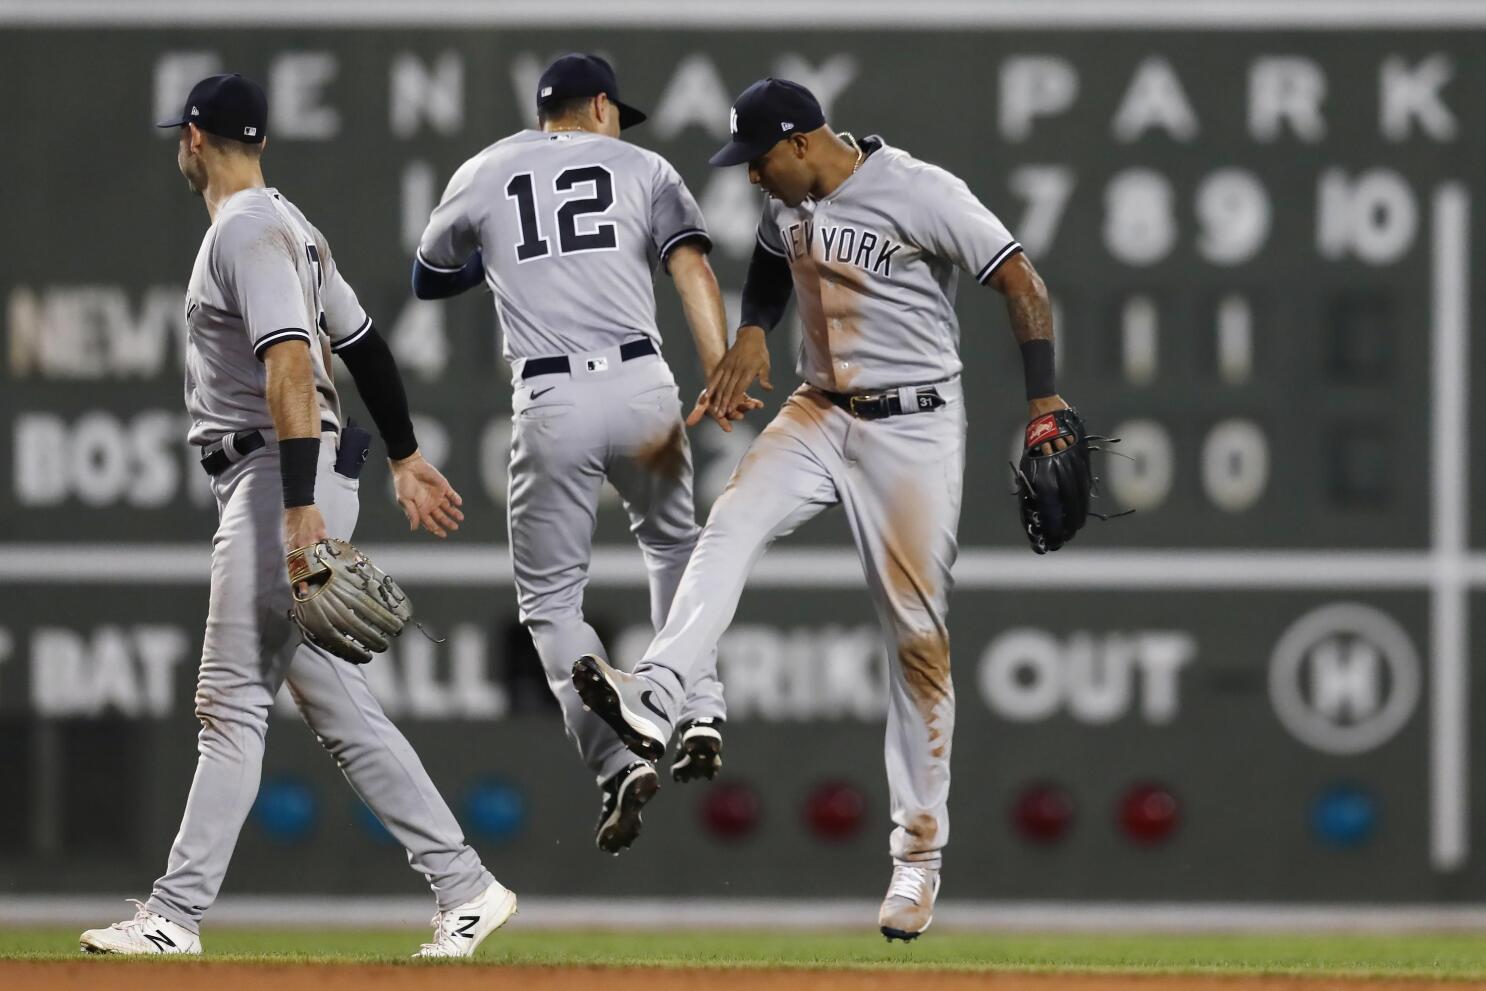 The 1939 Yankees belong on the shortlist for best ever MLB teams